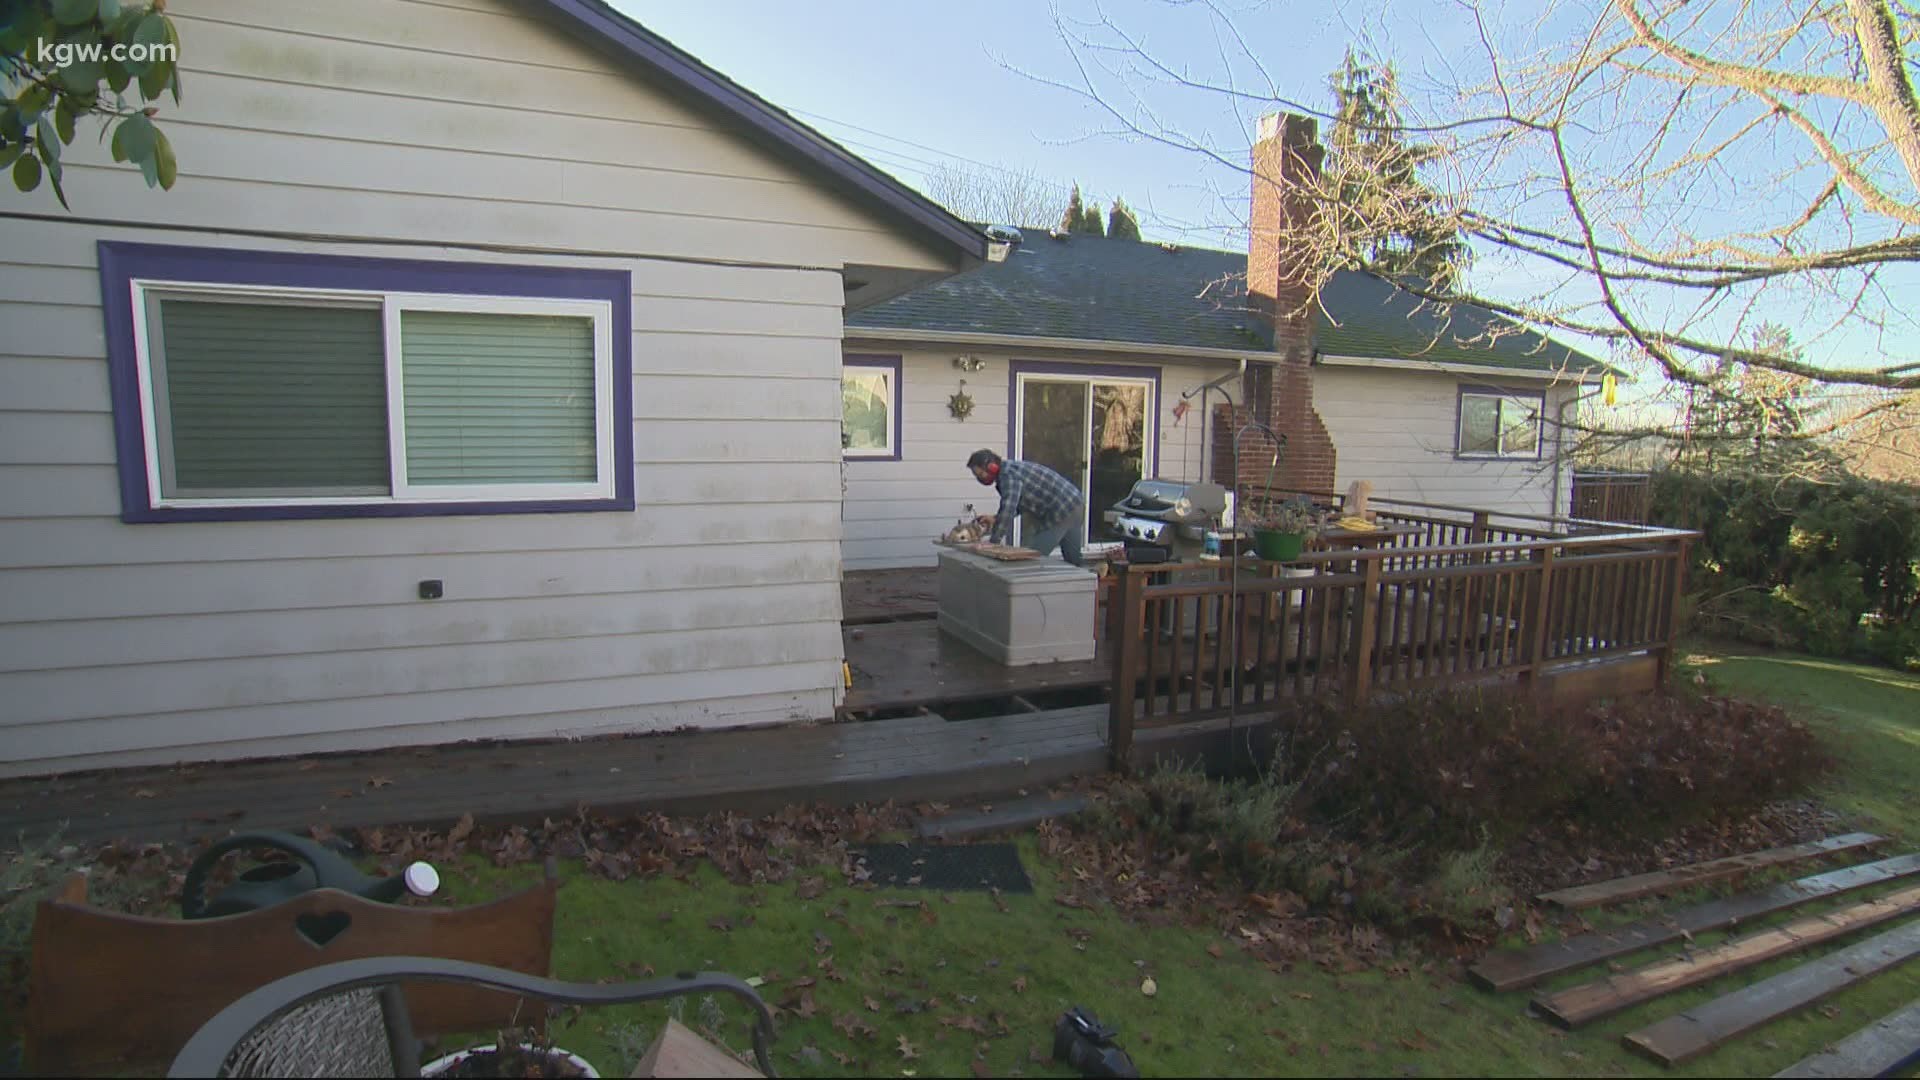 Friends, family and even strangers came together to help a Portland man after a catastrophic injury.